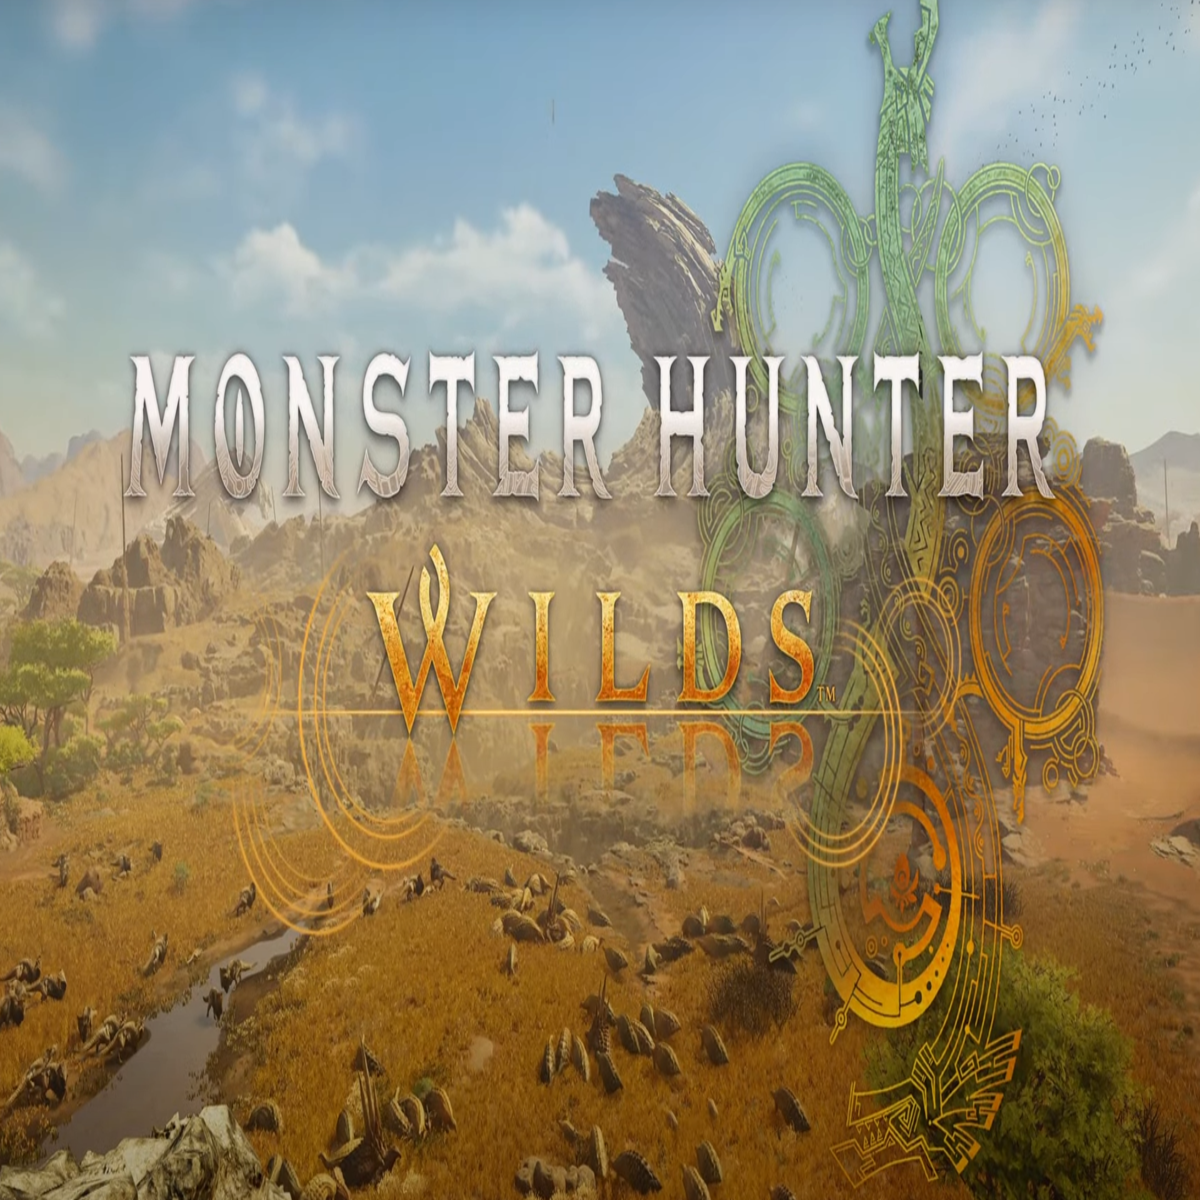 https://assetsio.gnwcdn.com/Monster-Hunter-Wild.png?width=1200&height=1200&fit=crop&quality=100&format=png&enable=upscale&auto=webp